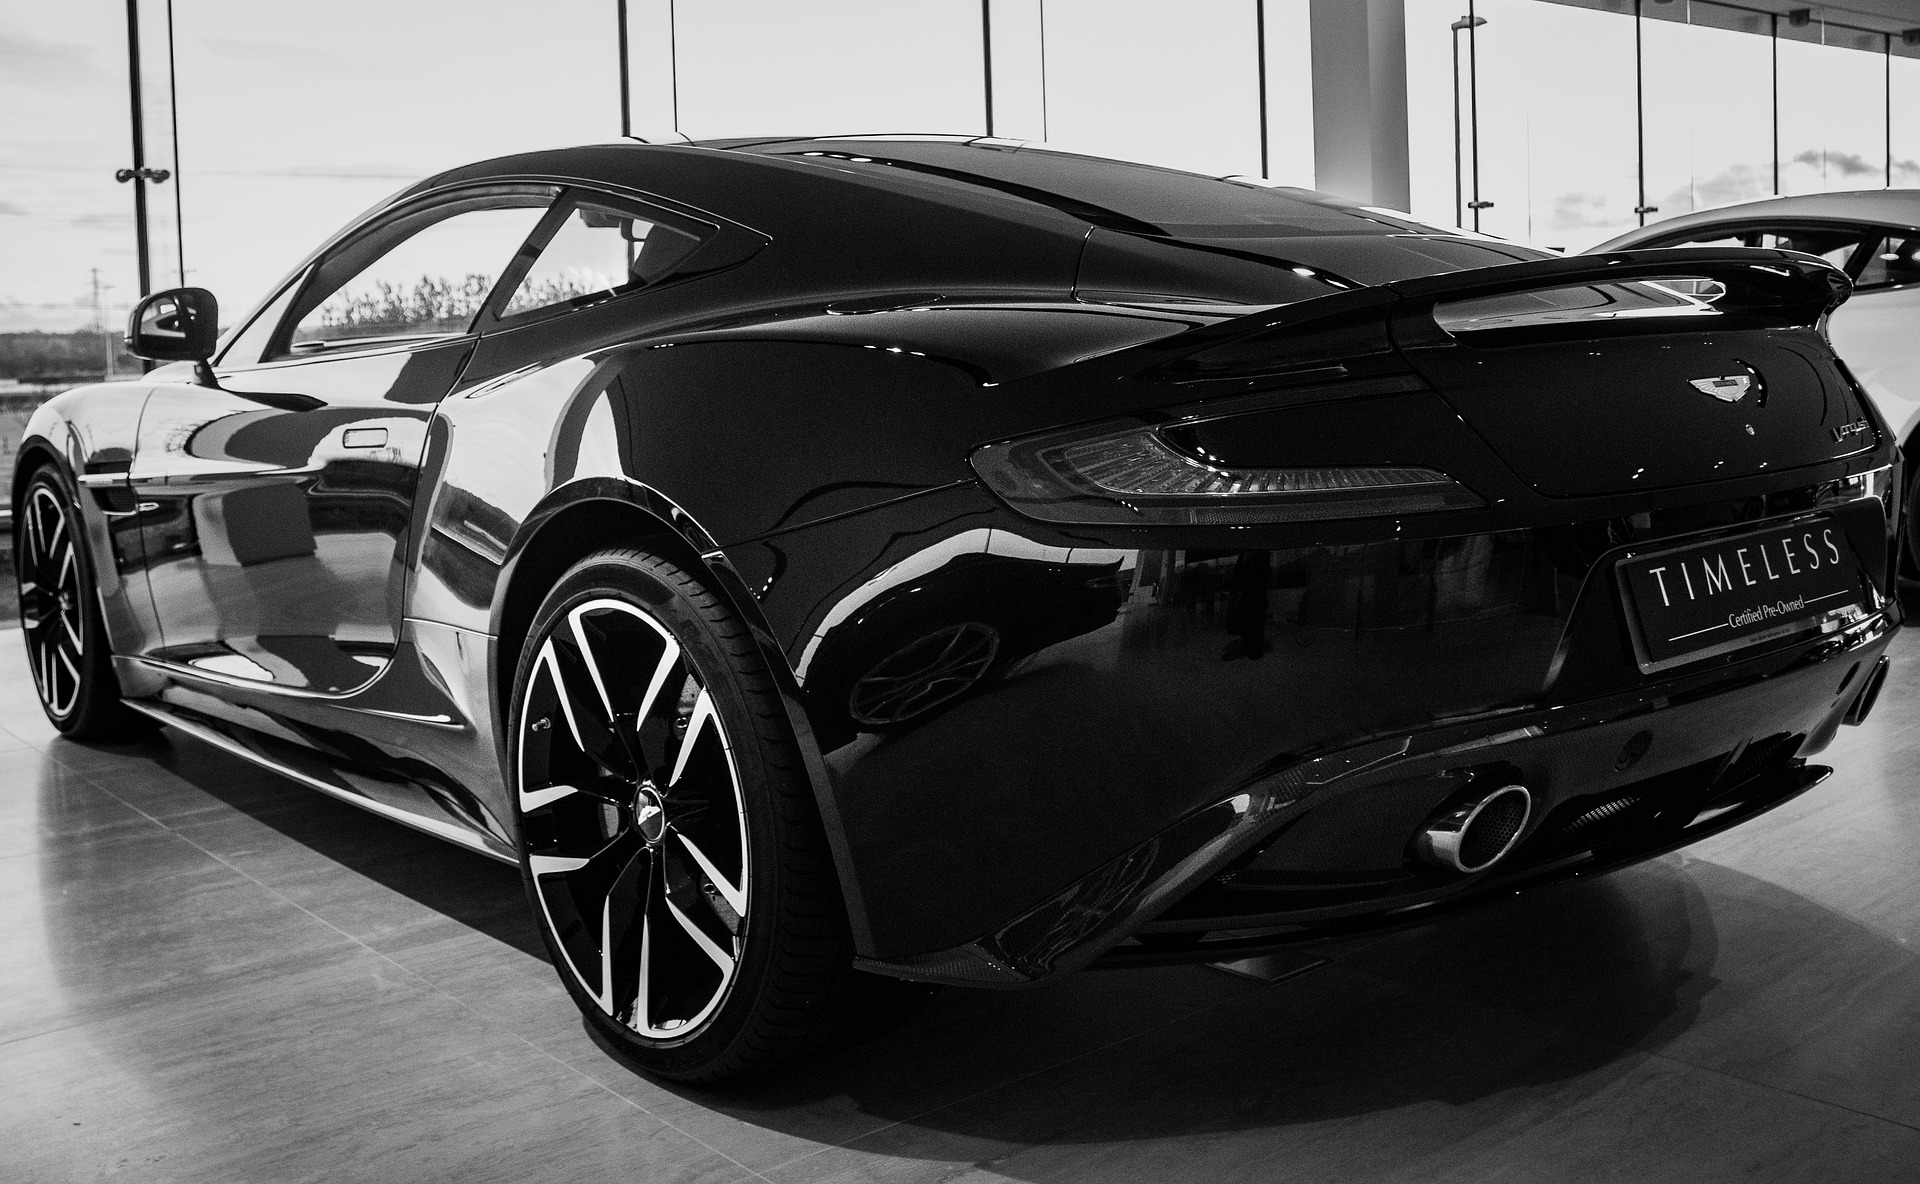 The rear end of an Aston Martin vehicle